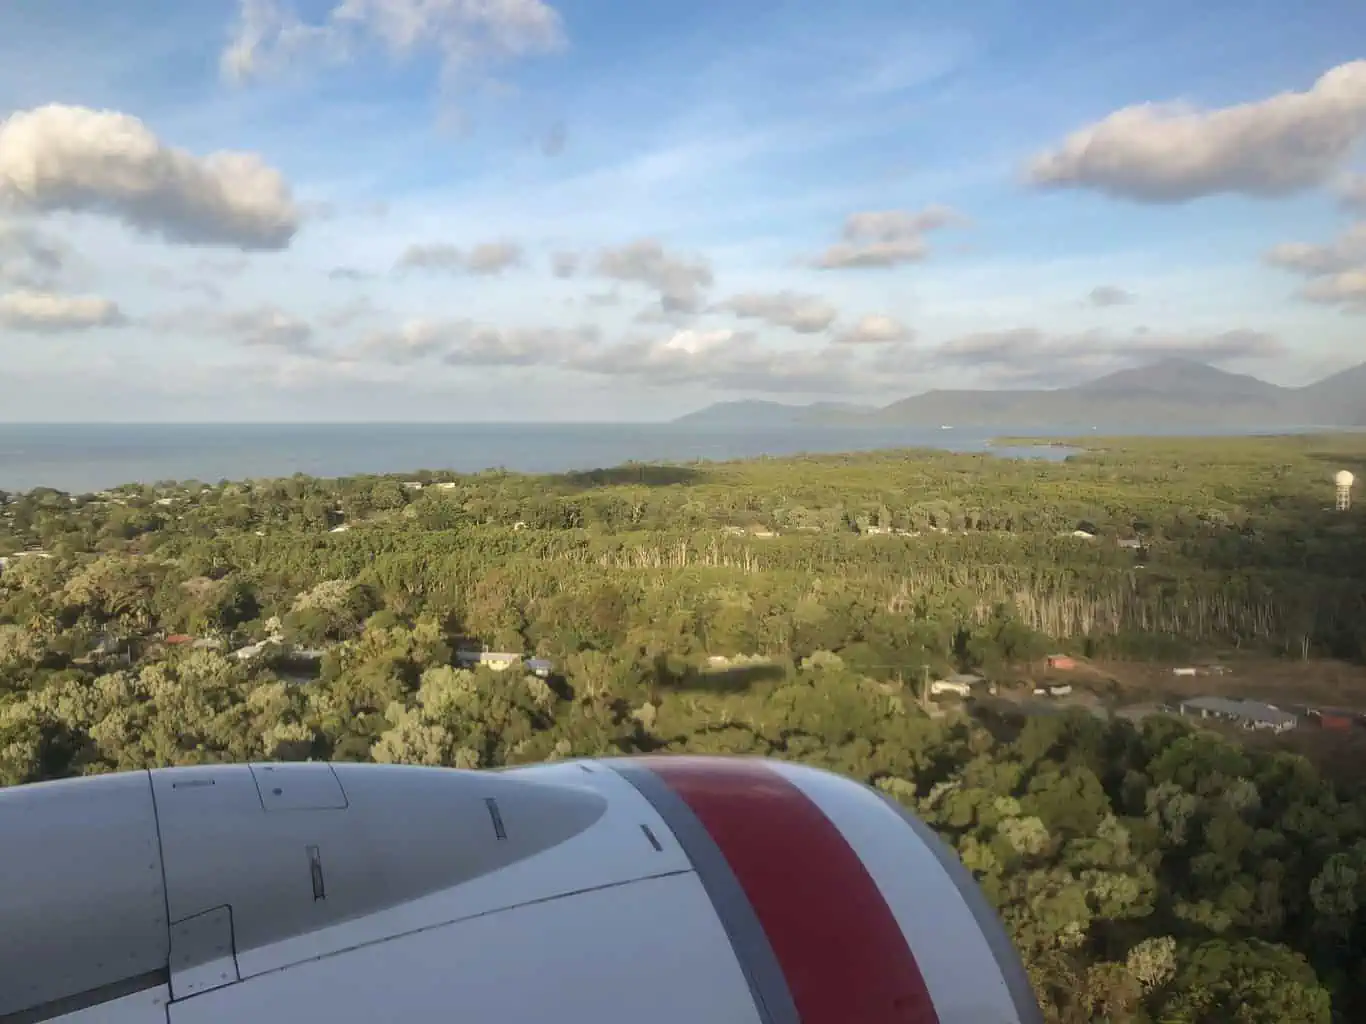 Travel Journal (9/19/2019):  Arriving in Cairns